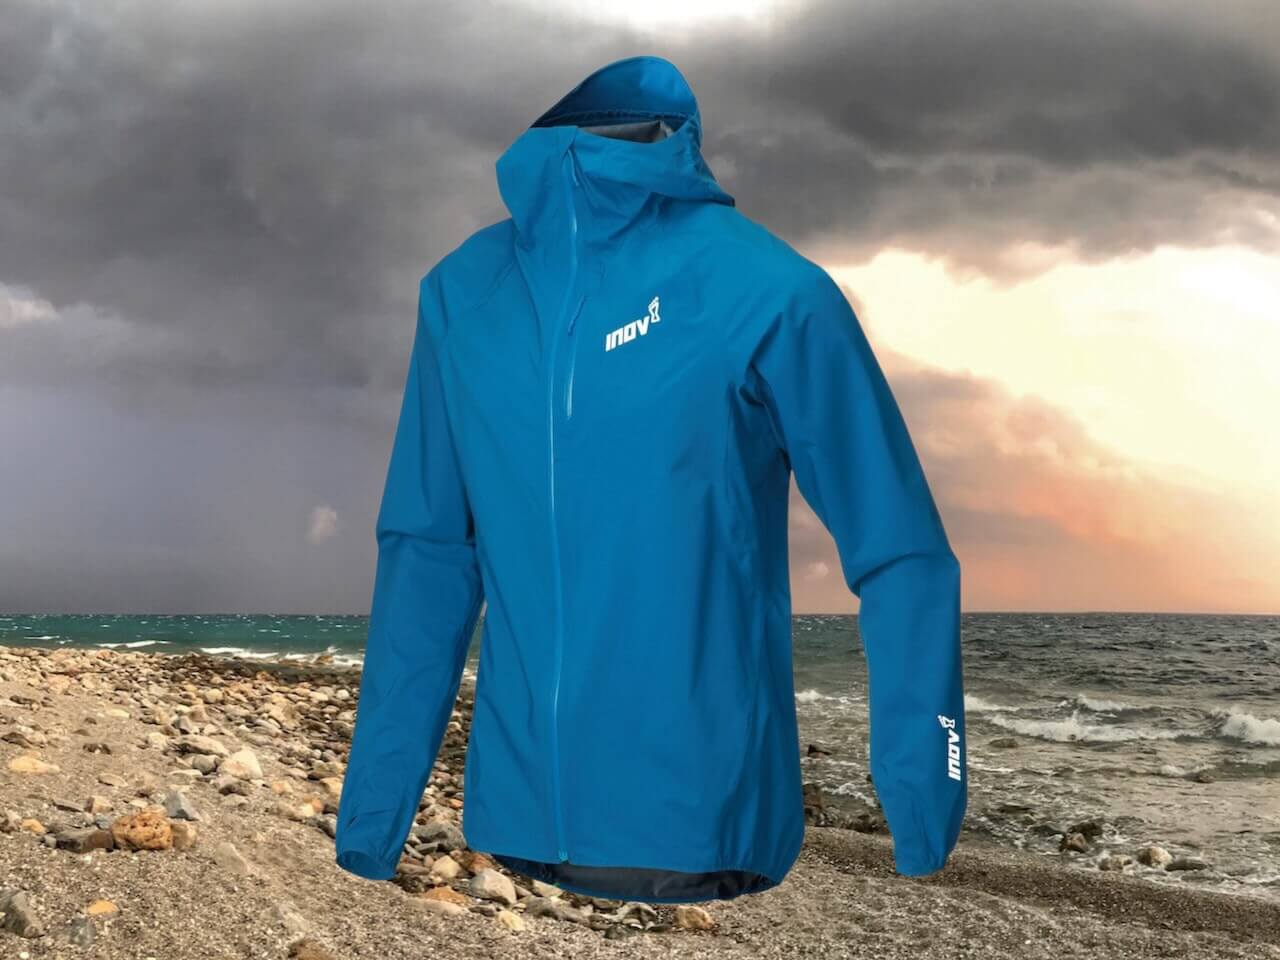 Featured image for “Test: Inov-8 Stormshell Waterproof Jacket”